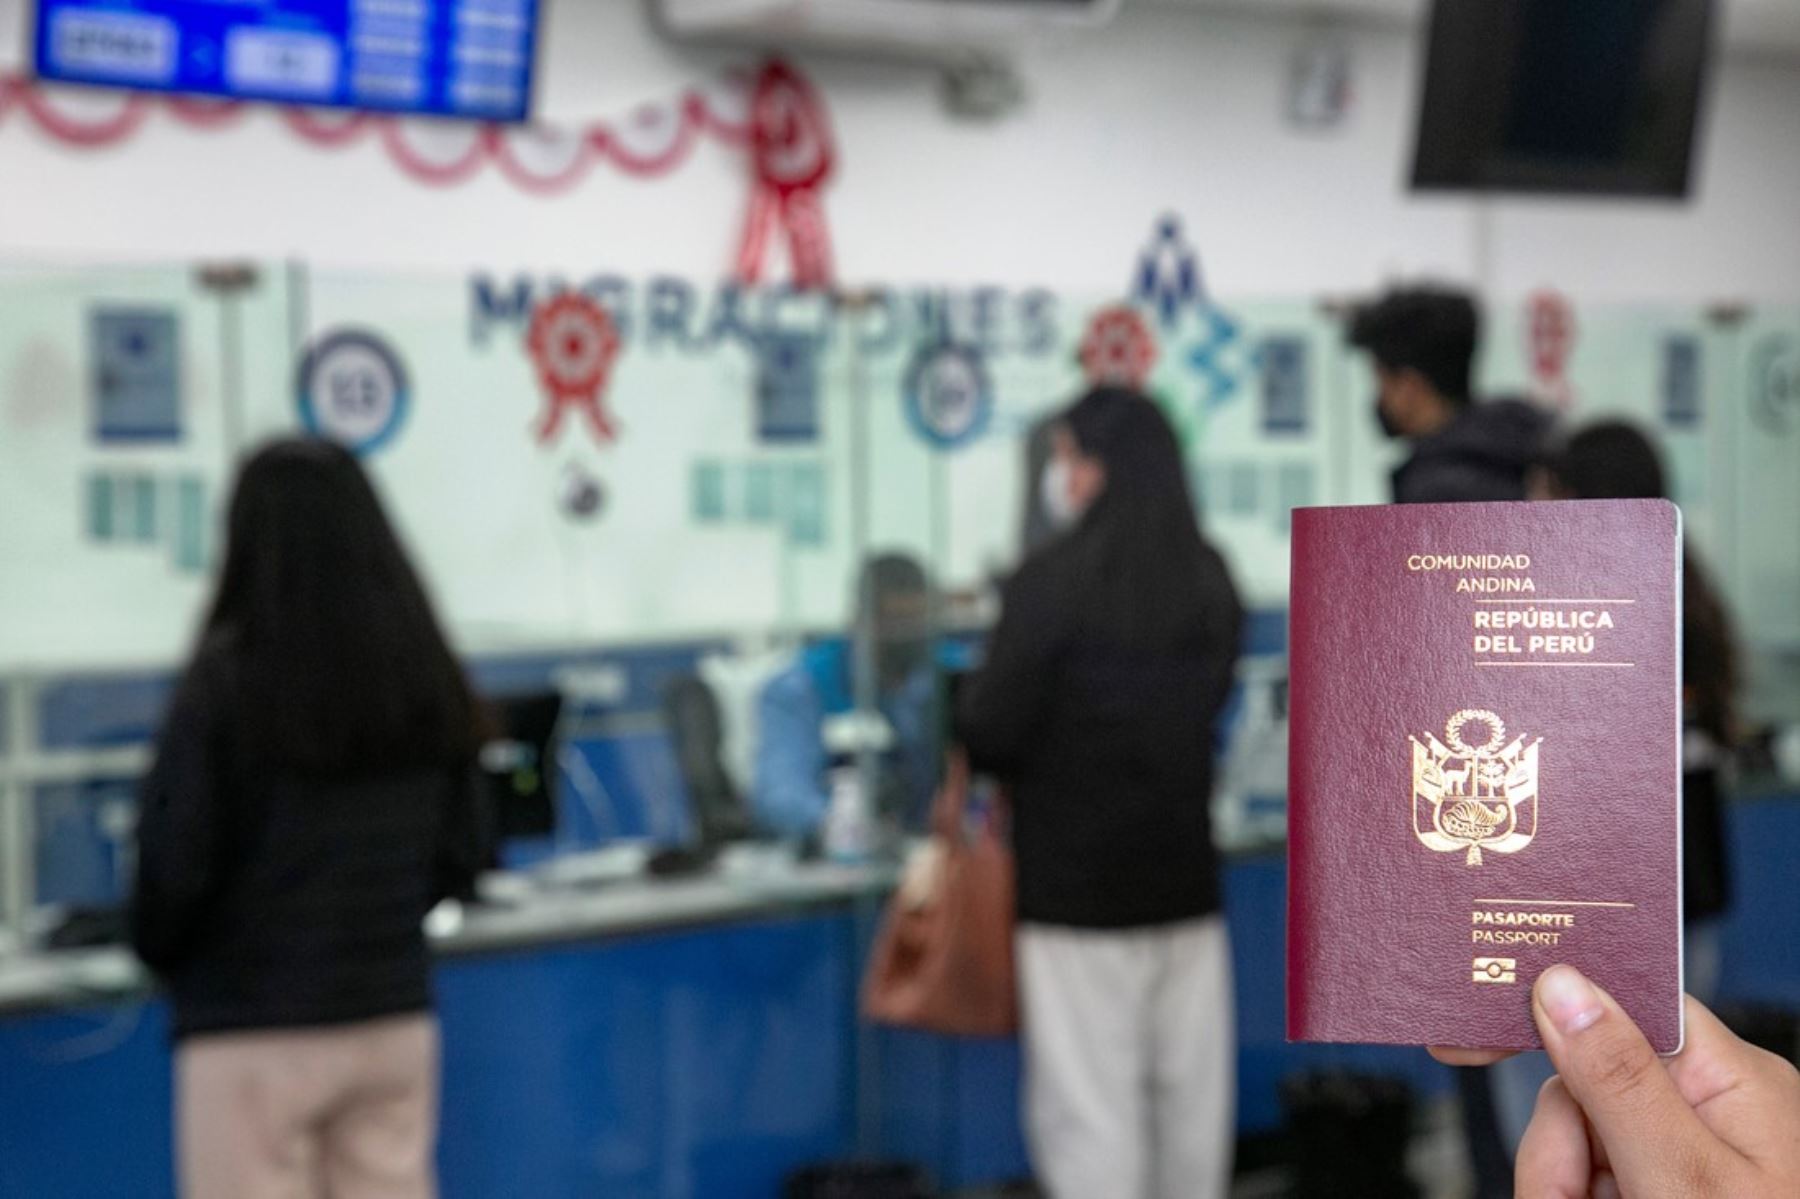 Migrations issued more than 100,000 passports in August, the highest monthly figure on record